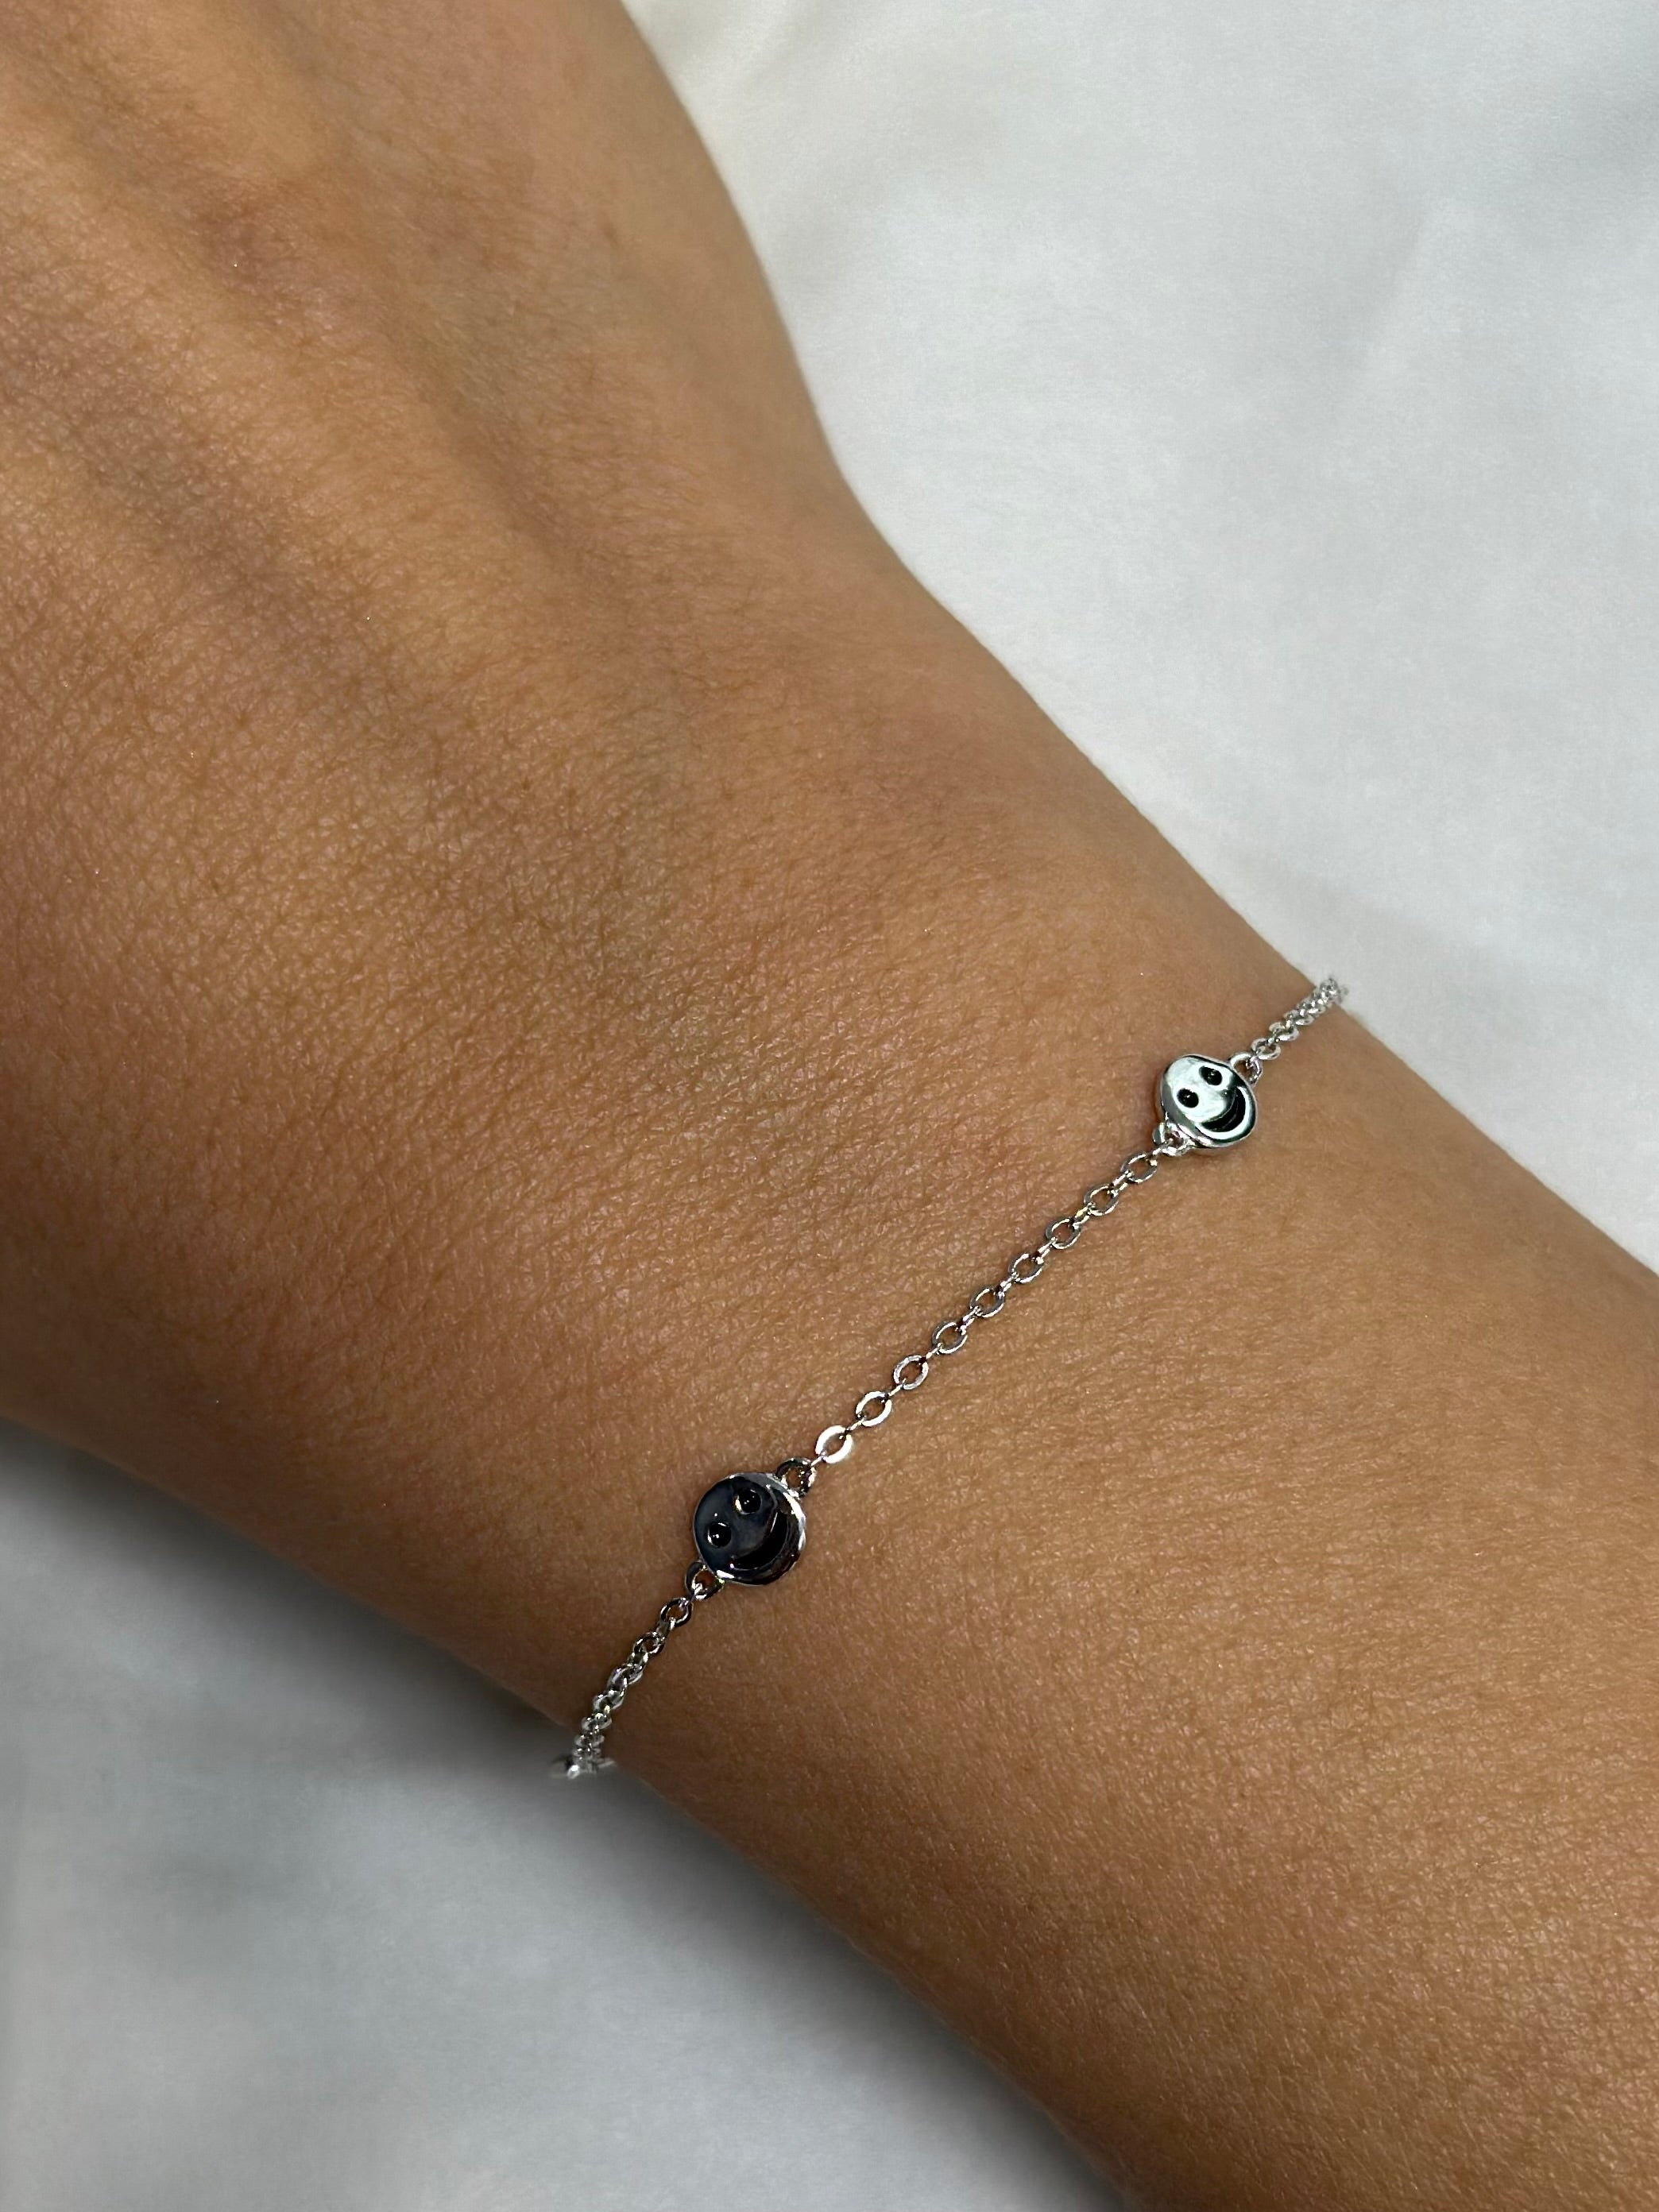 CLASSIC BRACELET WITH A SMILEY